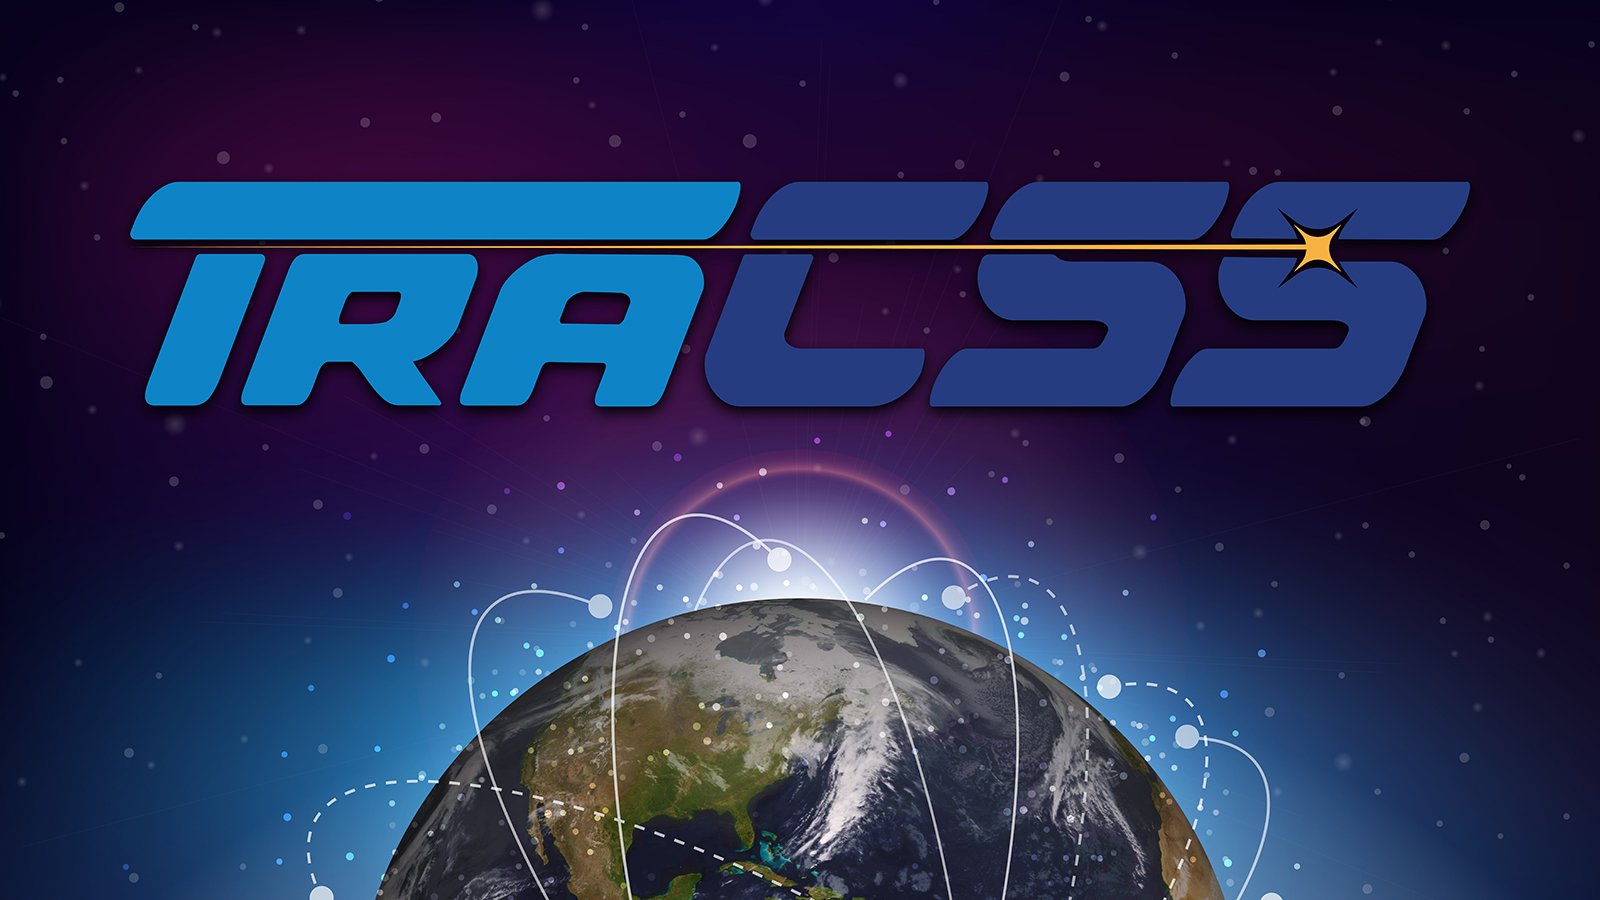 NOAA selects Parsons Corporation as system integrator for the Traffic Coordination System for Space